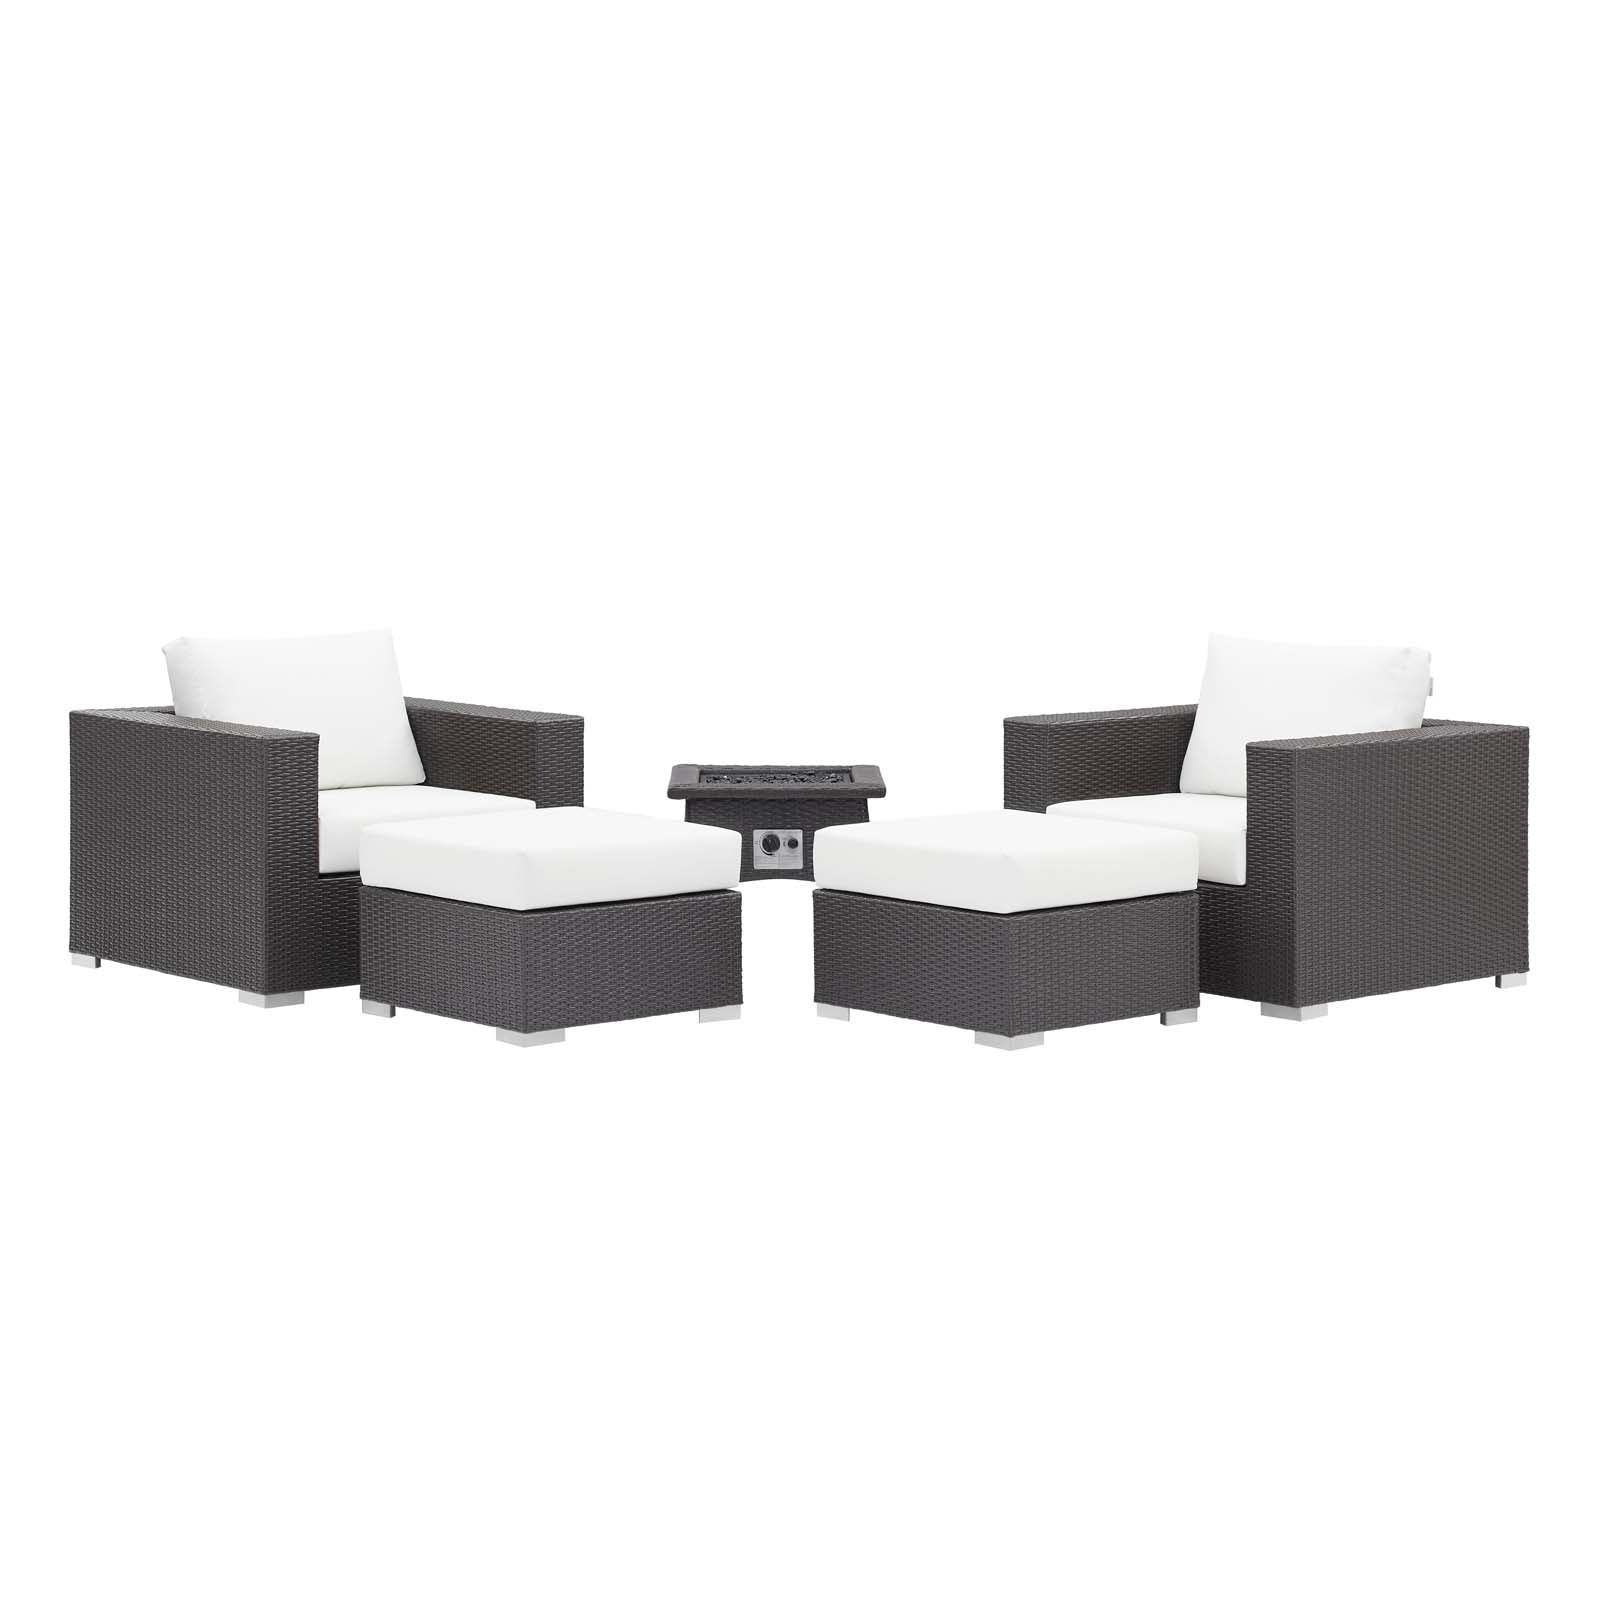 Convene 5 Piece Set Outdoor Patio with Fire Pit - East Shore Modern Home Furnishings